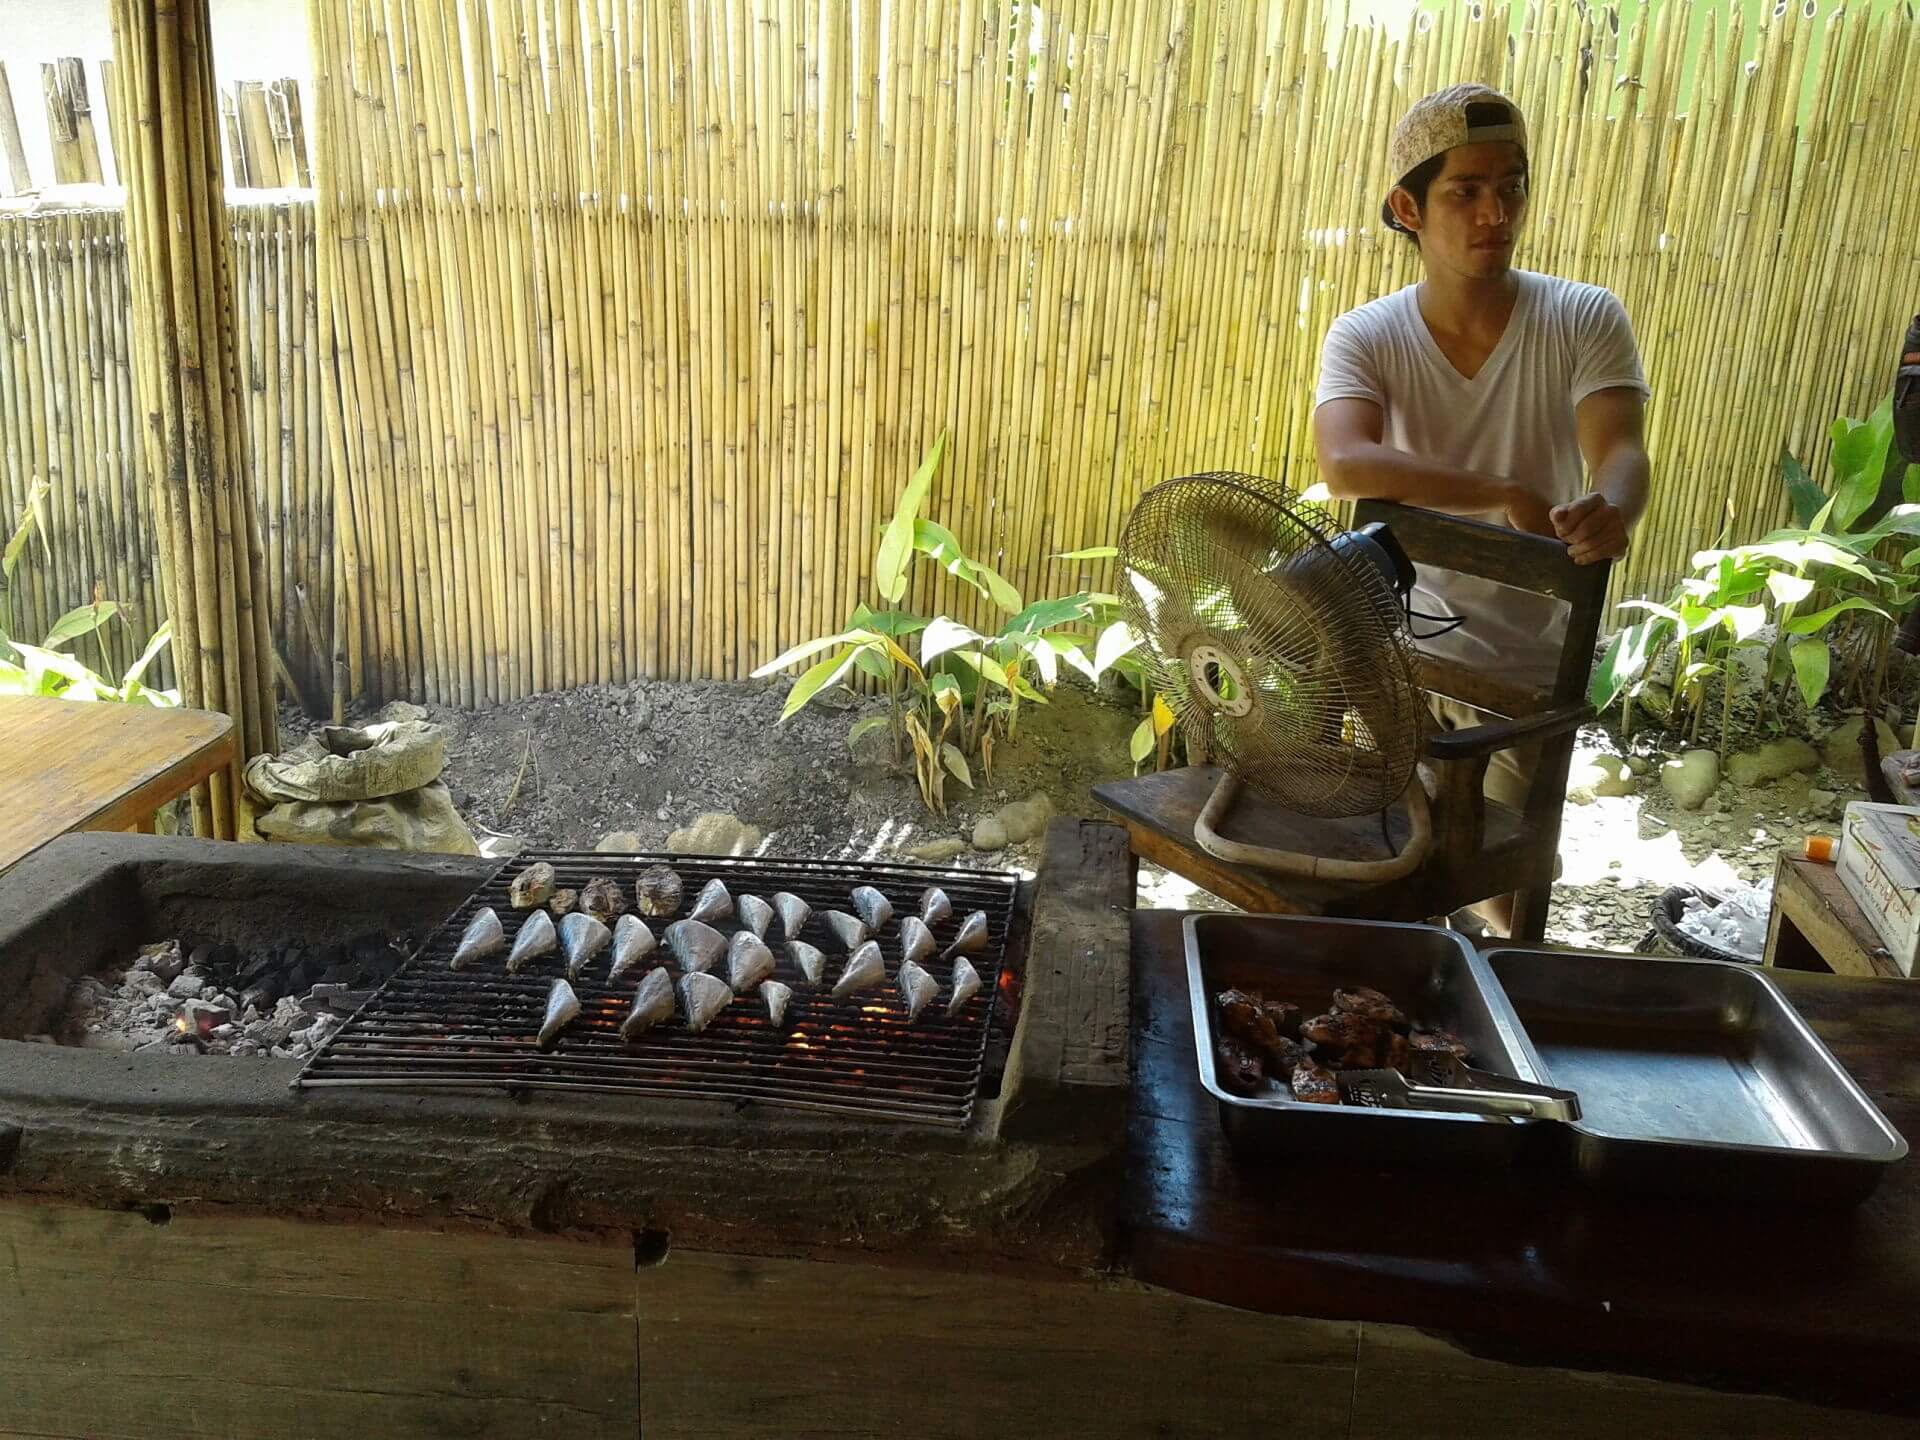 Underground River Lunch Grilling Fish